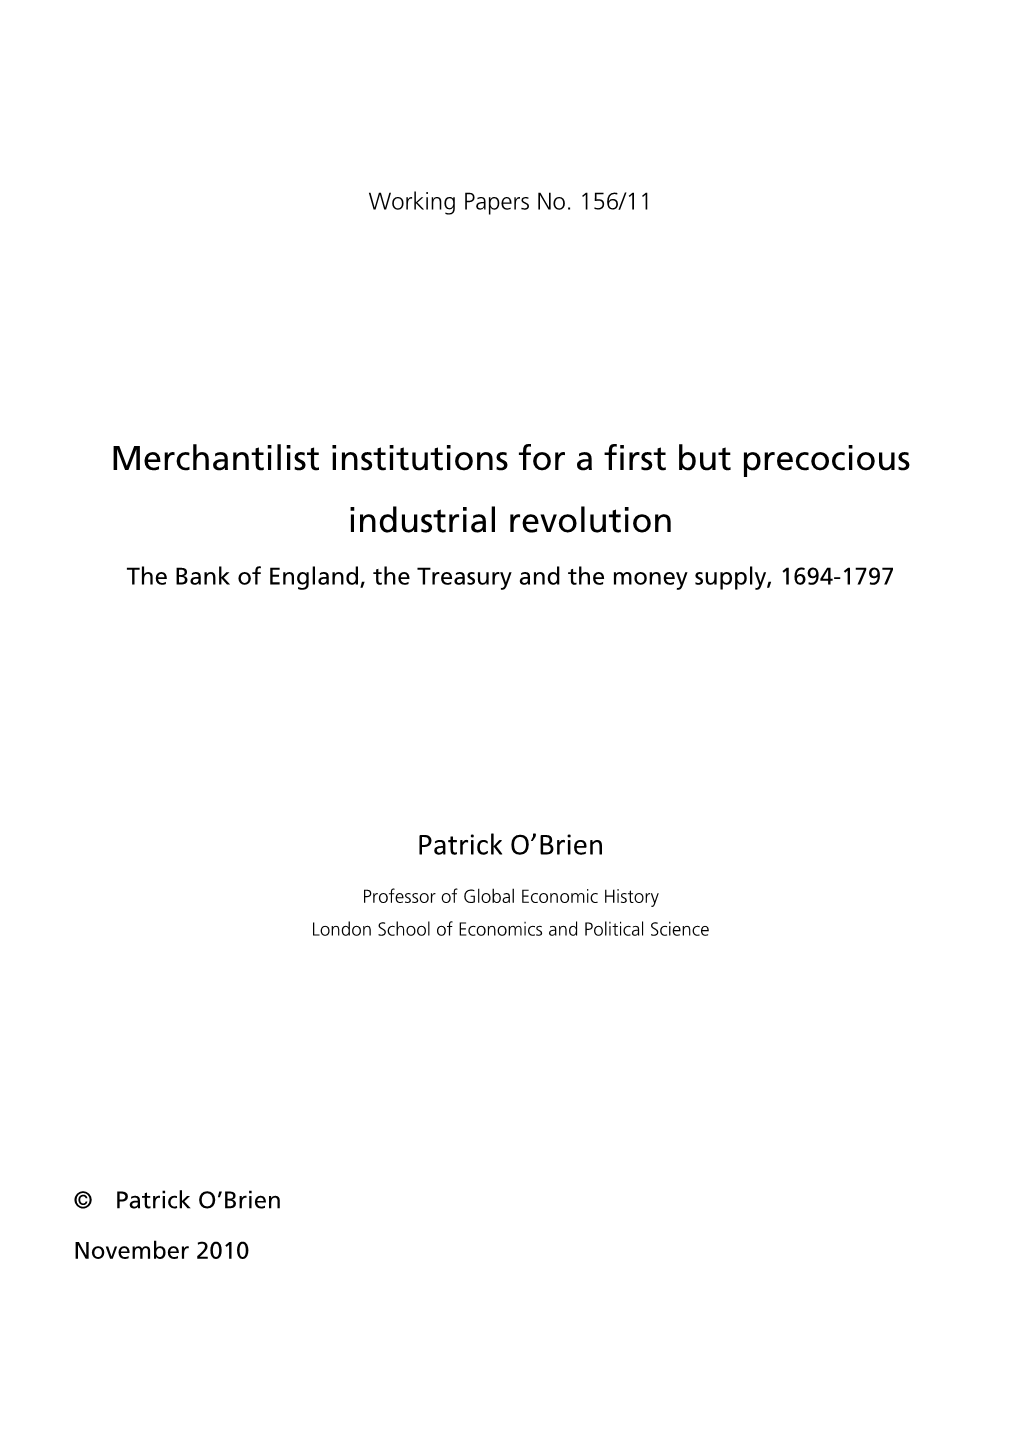 Merchantilist Institutions for a First but Precocious Industrial Revolution